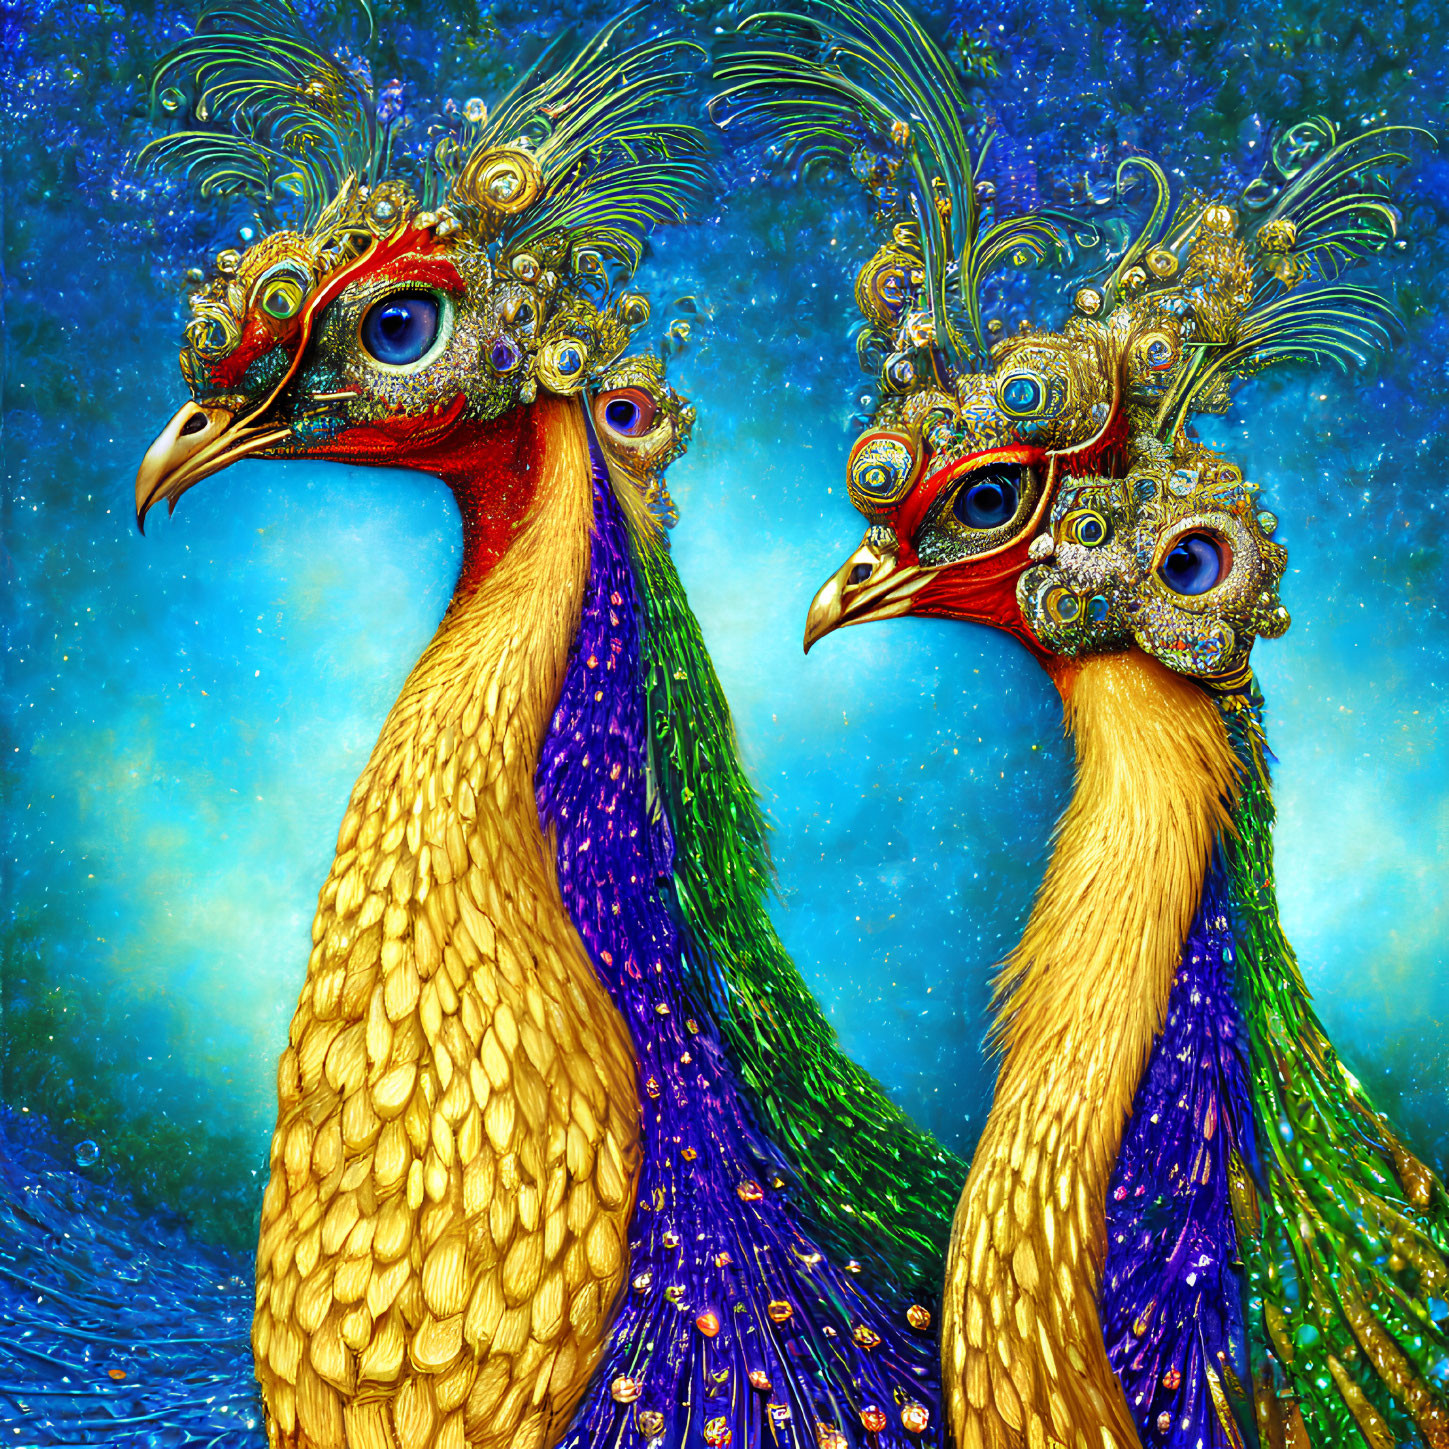 Ornately Decorated Peacocks with Vibrant Feathers on Blue Background